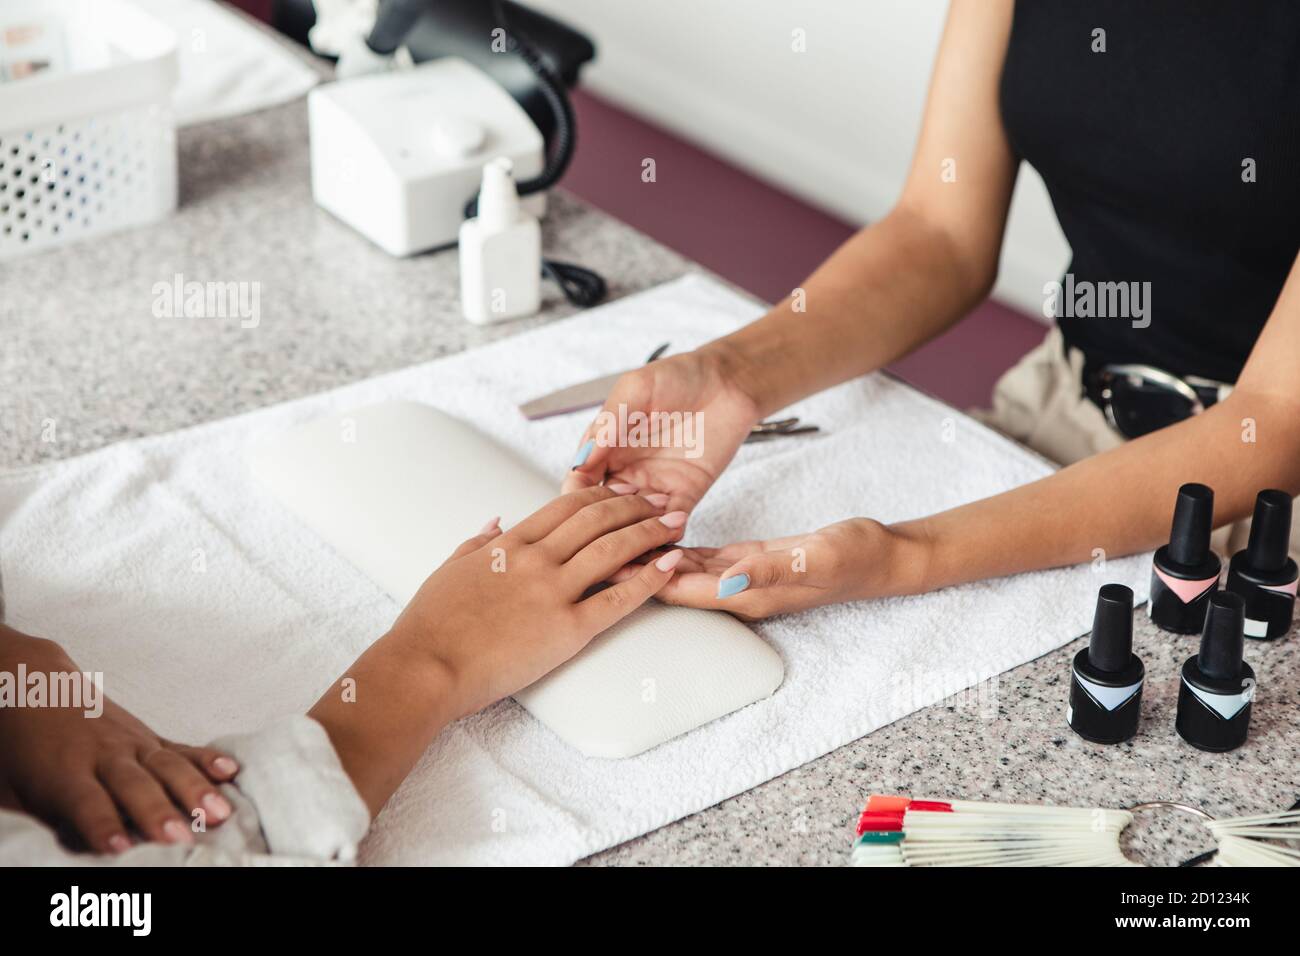 Reopening of beauty salon and a lot of work. Manicurist checks nails african american woman on table with equipment and bottles of varnish Stock Photo